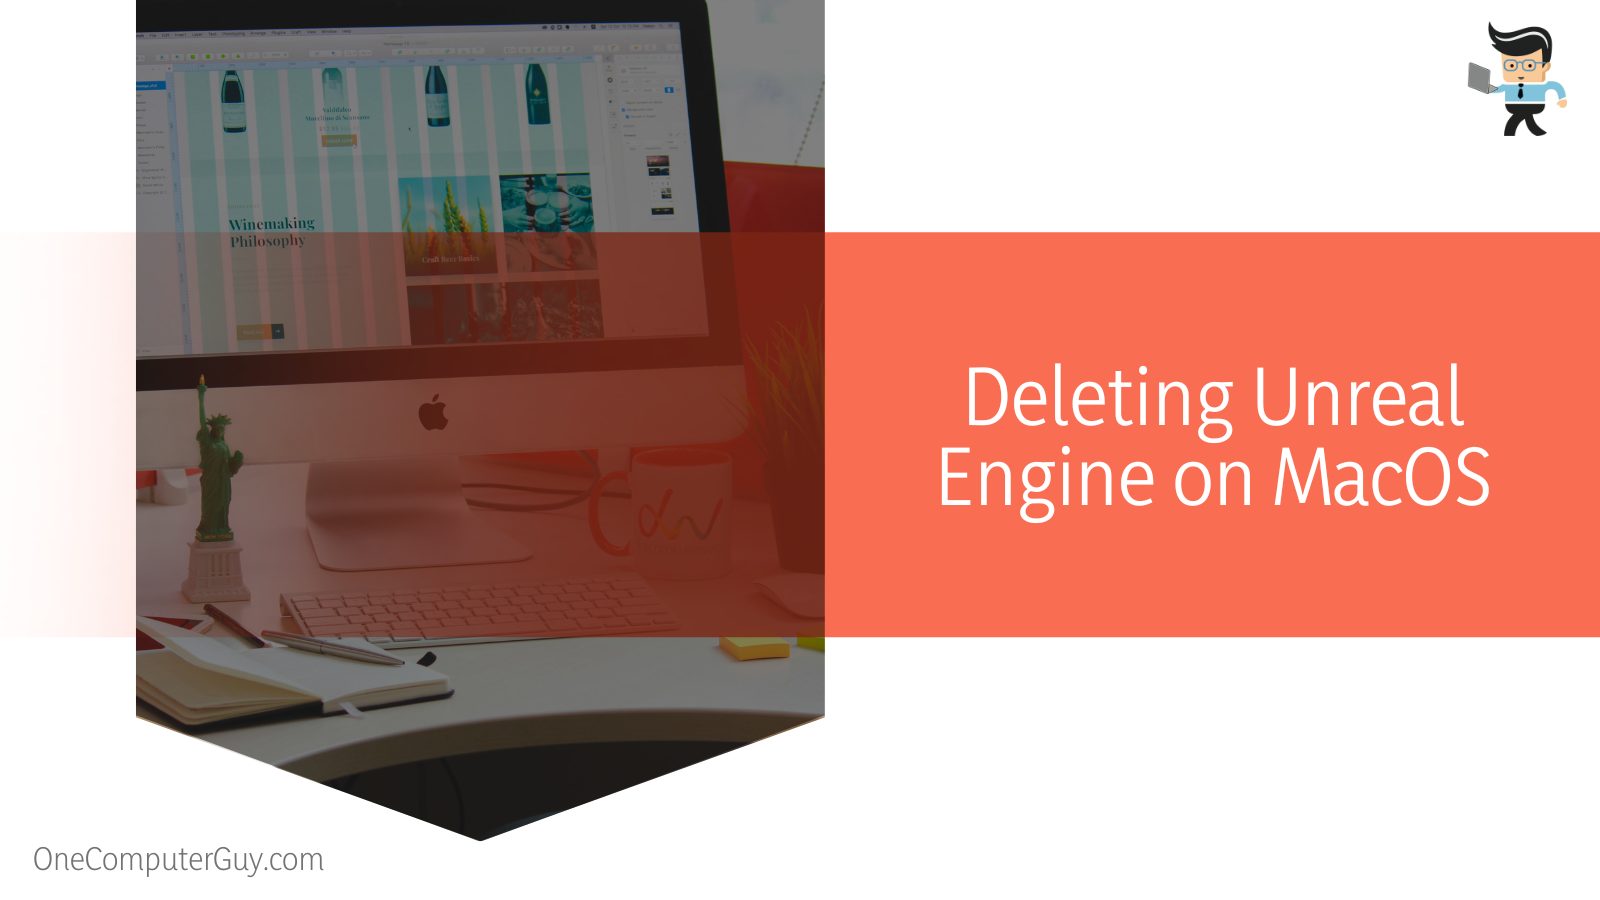 Deleting Unreal Engine on MacOS